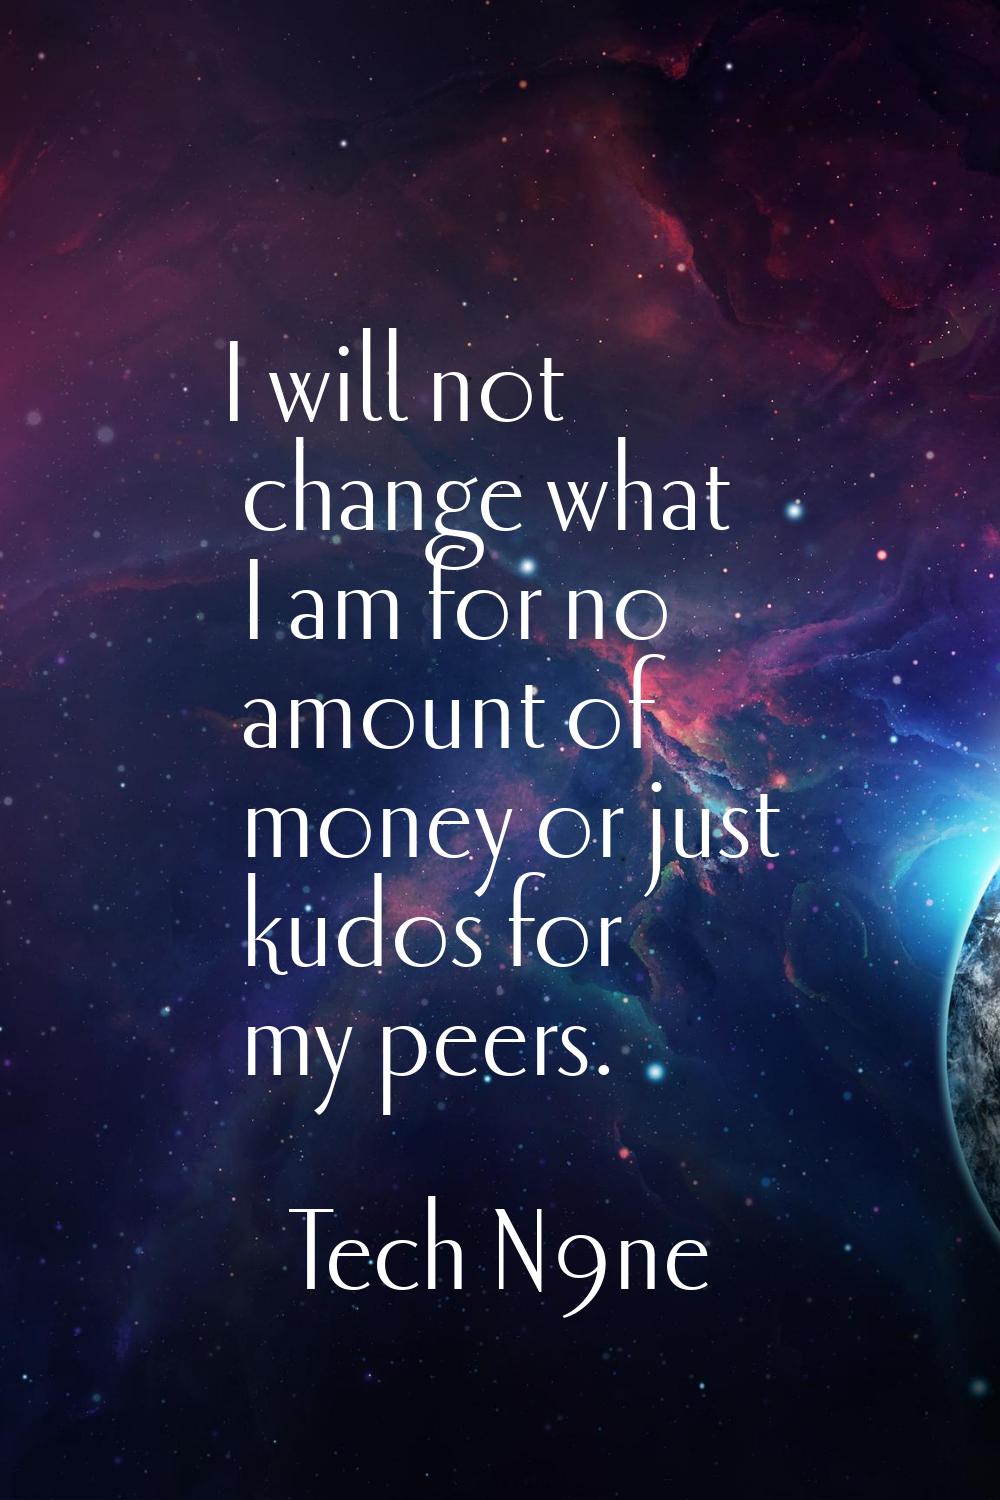 I will not change what I am for no amount of money or just kudos for my peers.